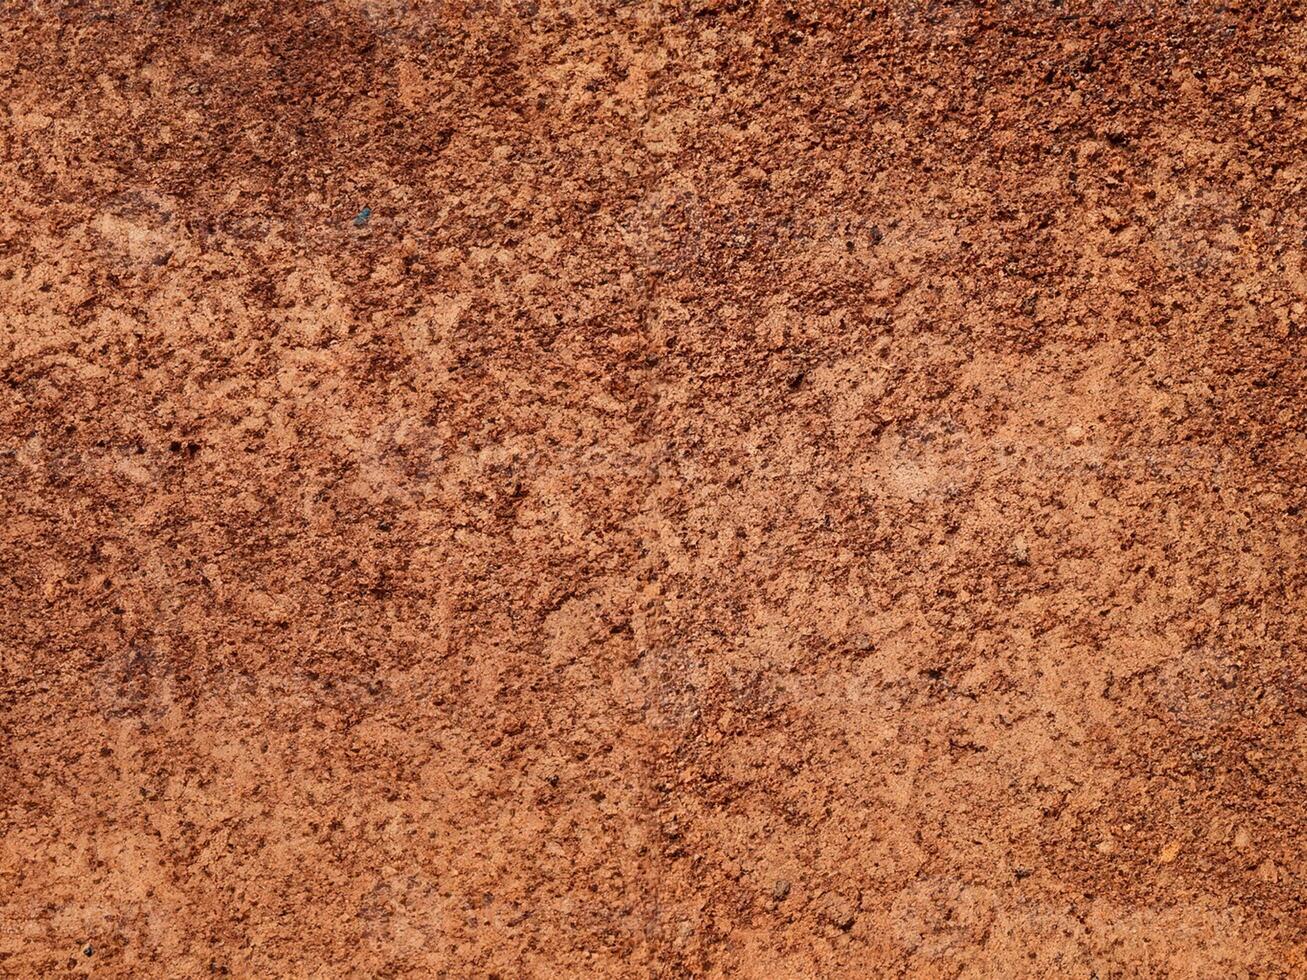 red dirt road texture photo